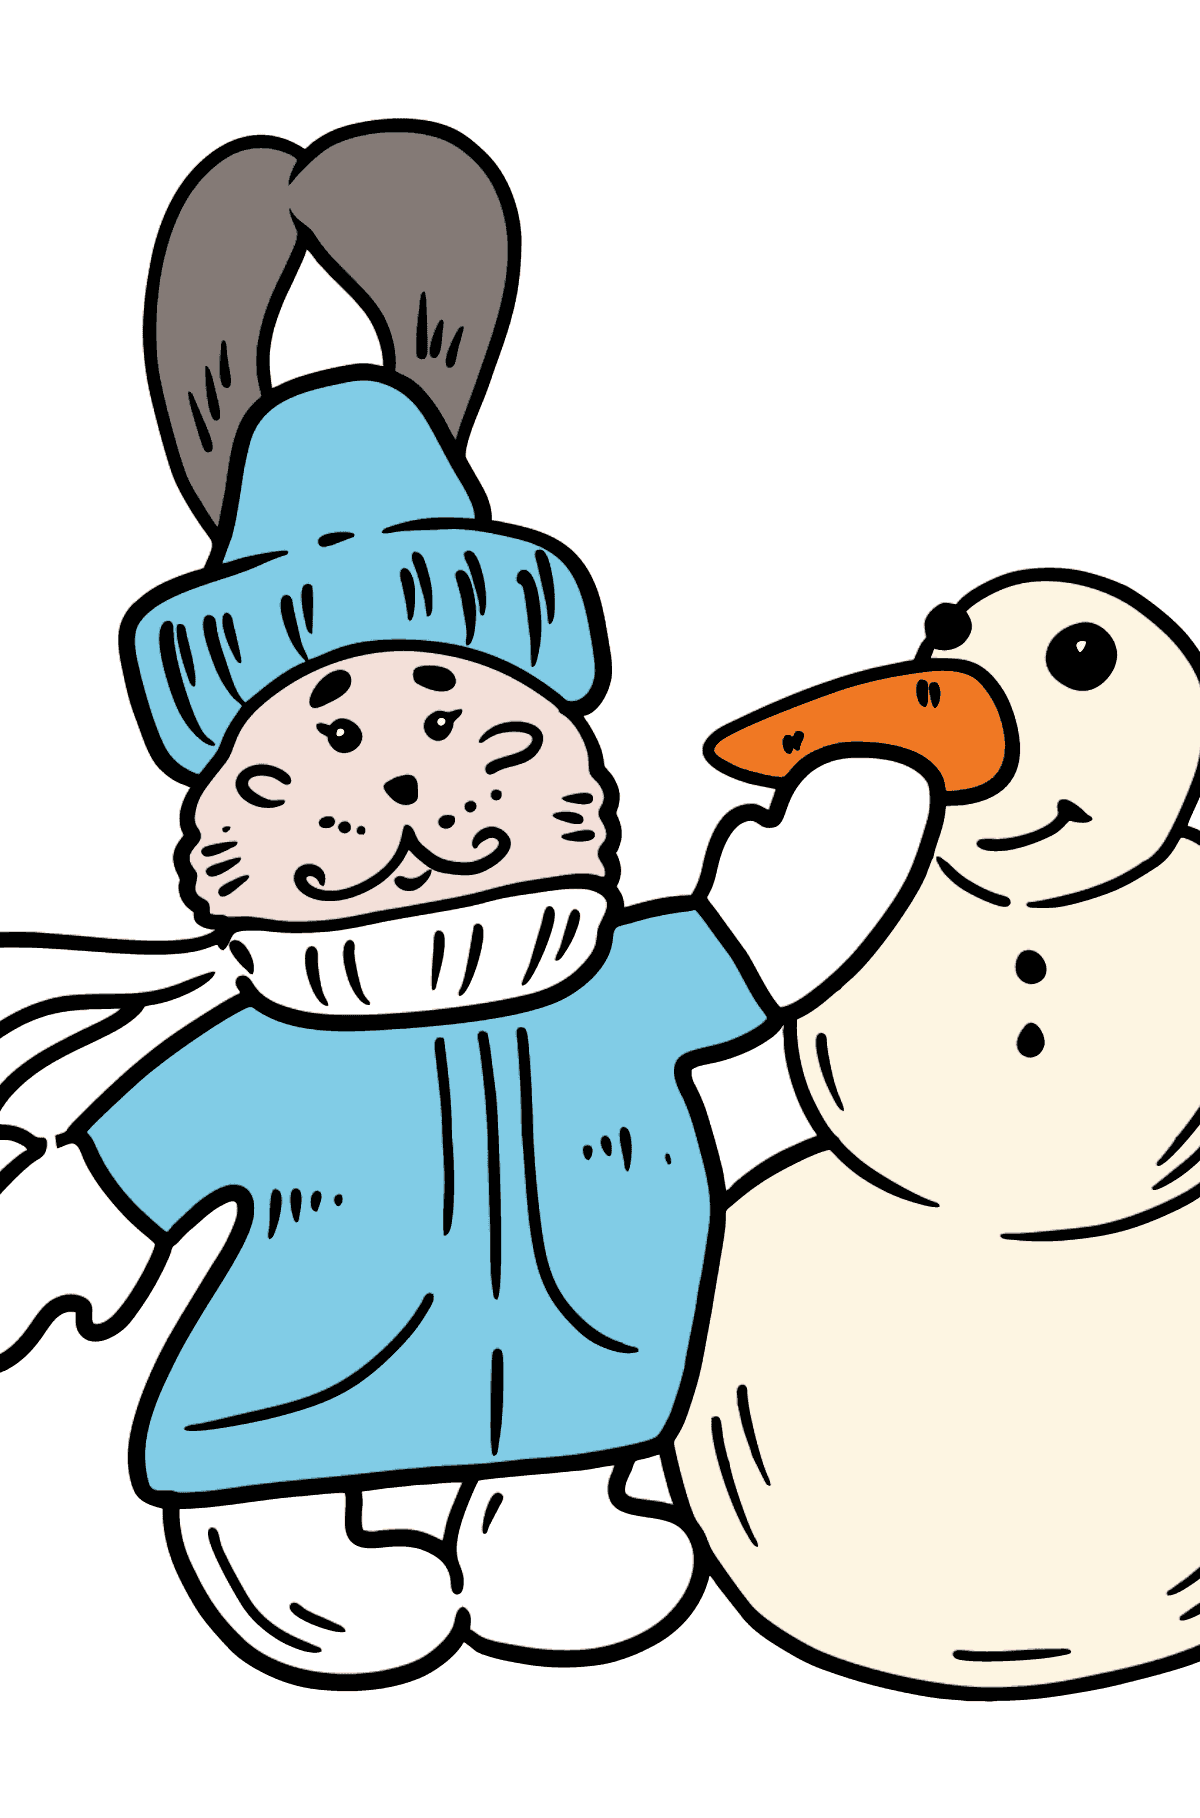 Bunny in Winter coloring page - Coloring Pages for Kids